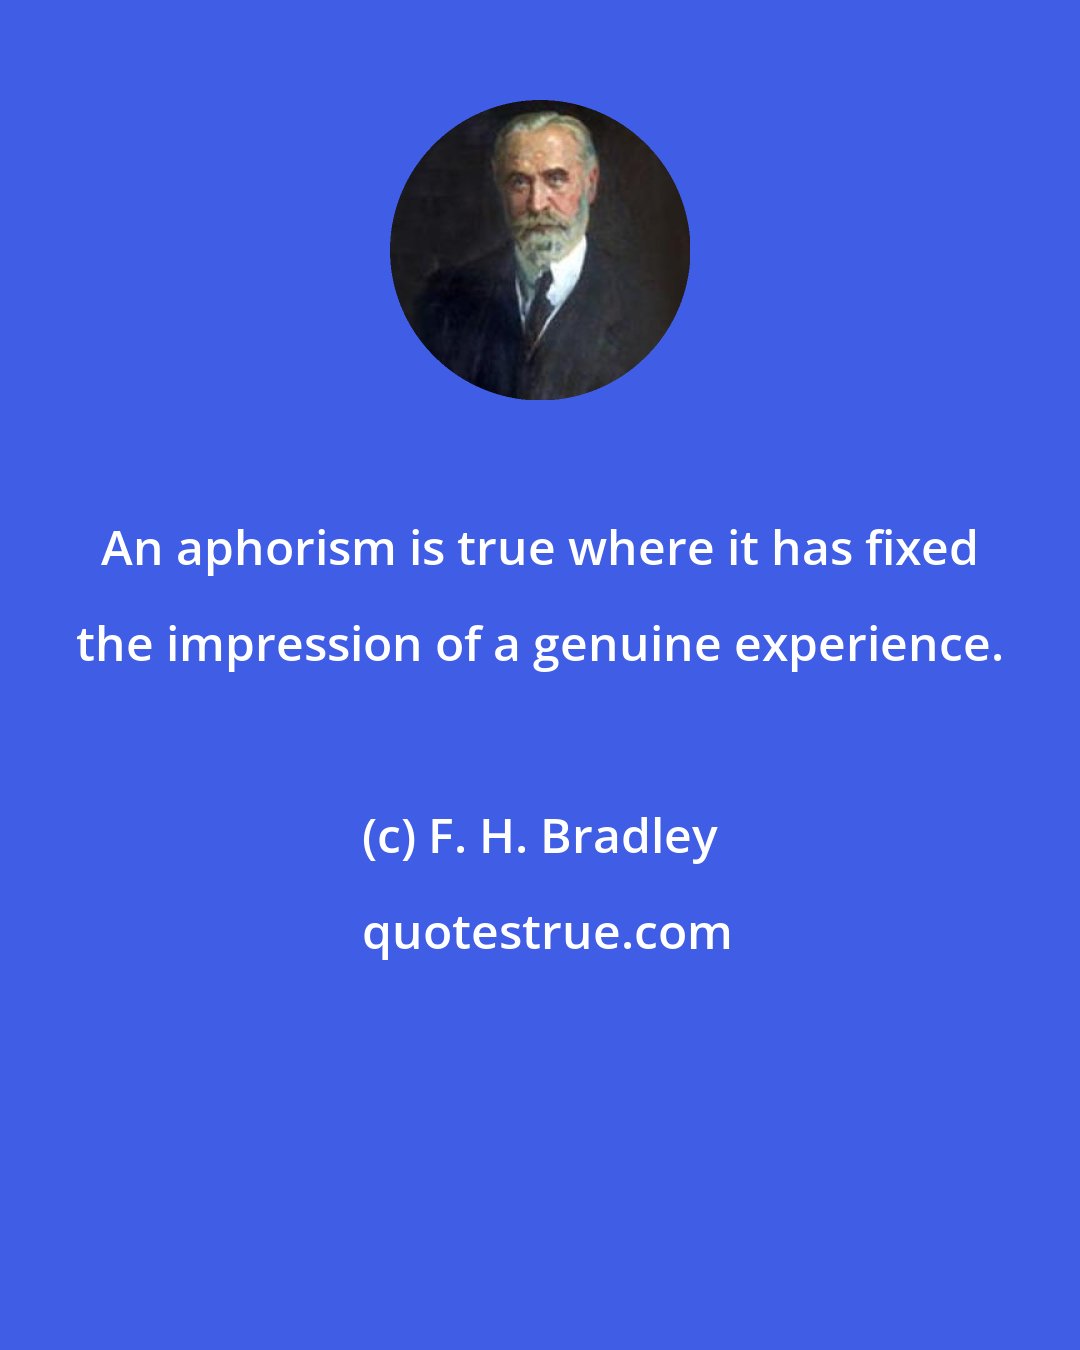 F. H. Bradley: An aphorism is true where it has fixed the impression of a genuine experience.